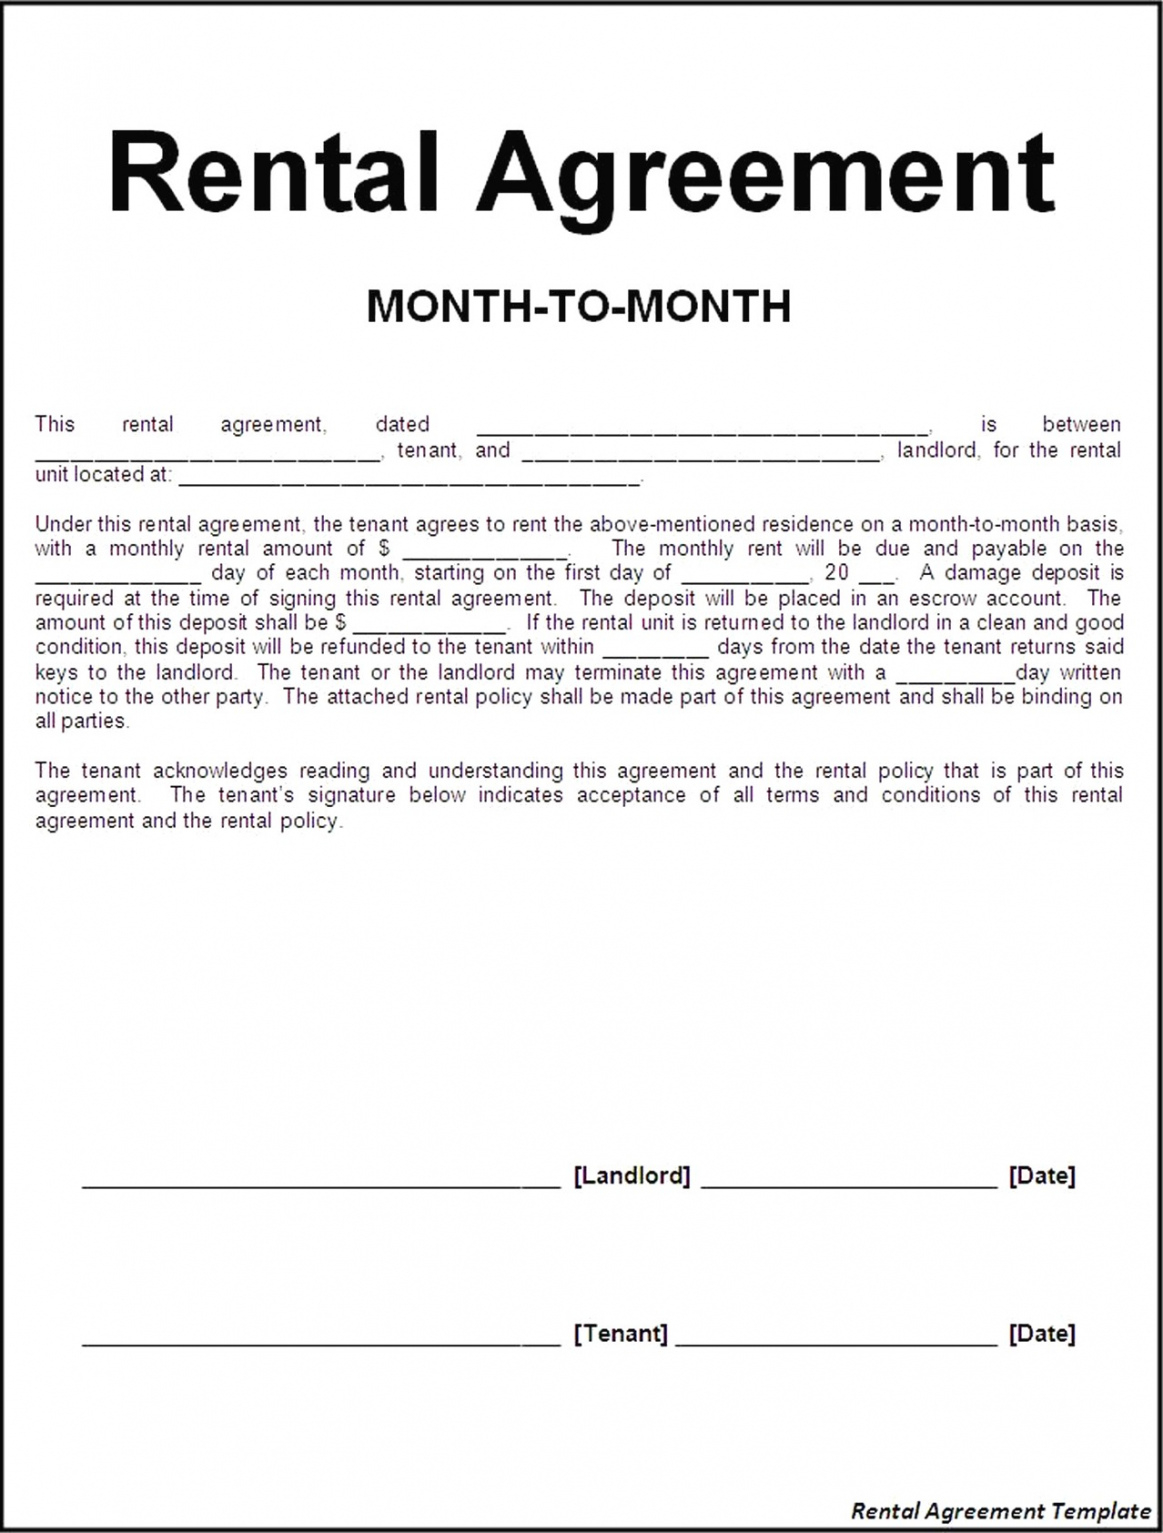 free the important terms to include in a rental agreement legal rental agreement template word